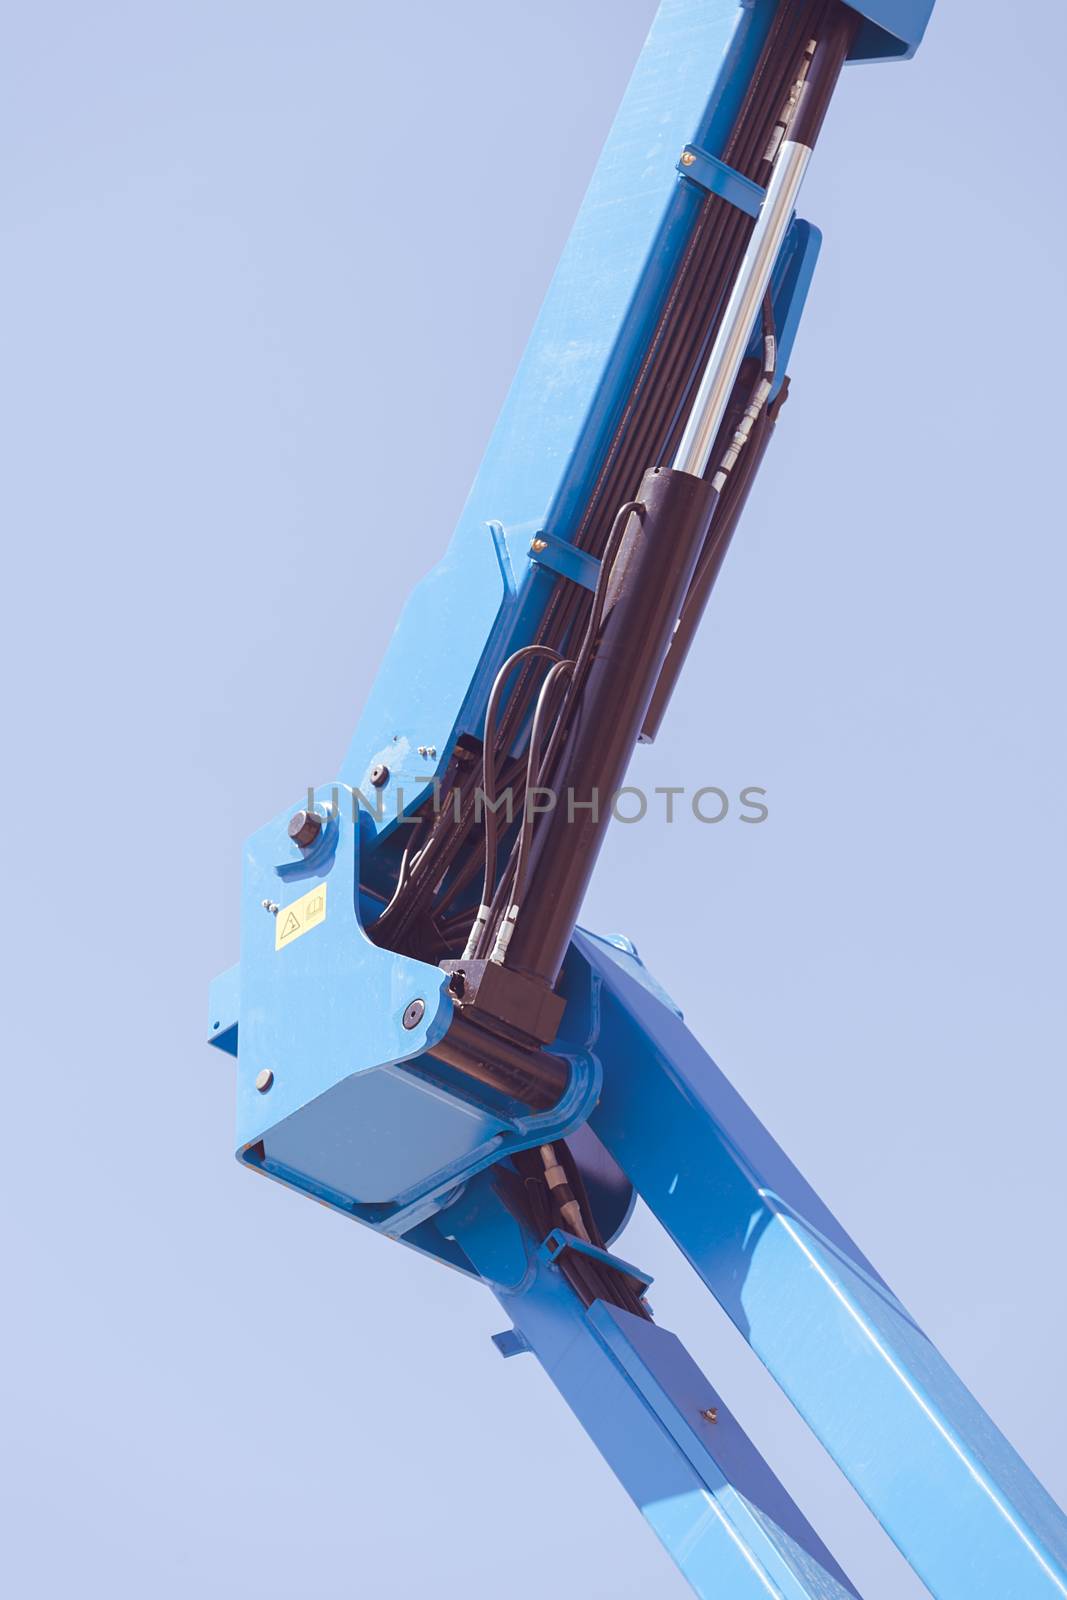 Details crane in construction on the blue background, note shallow depth of field